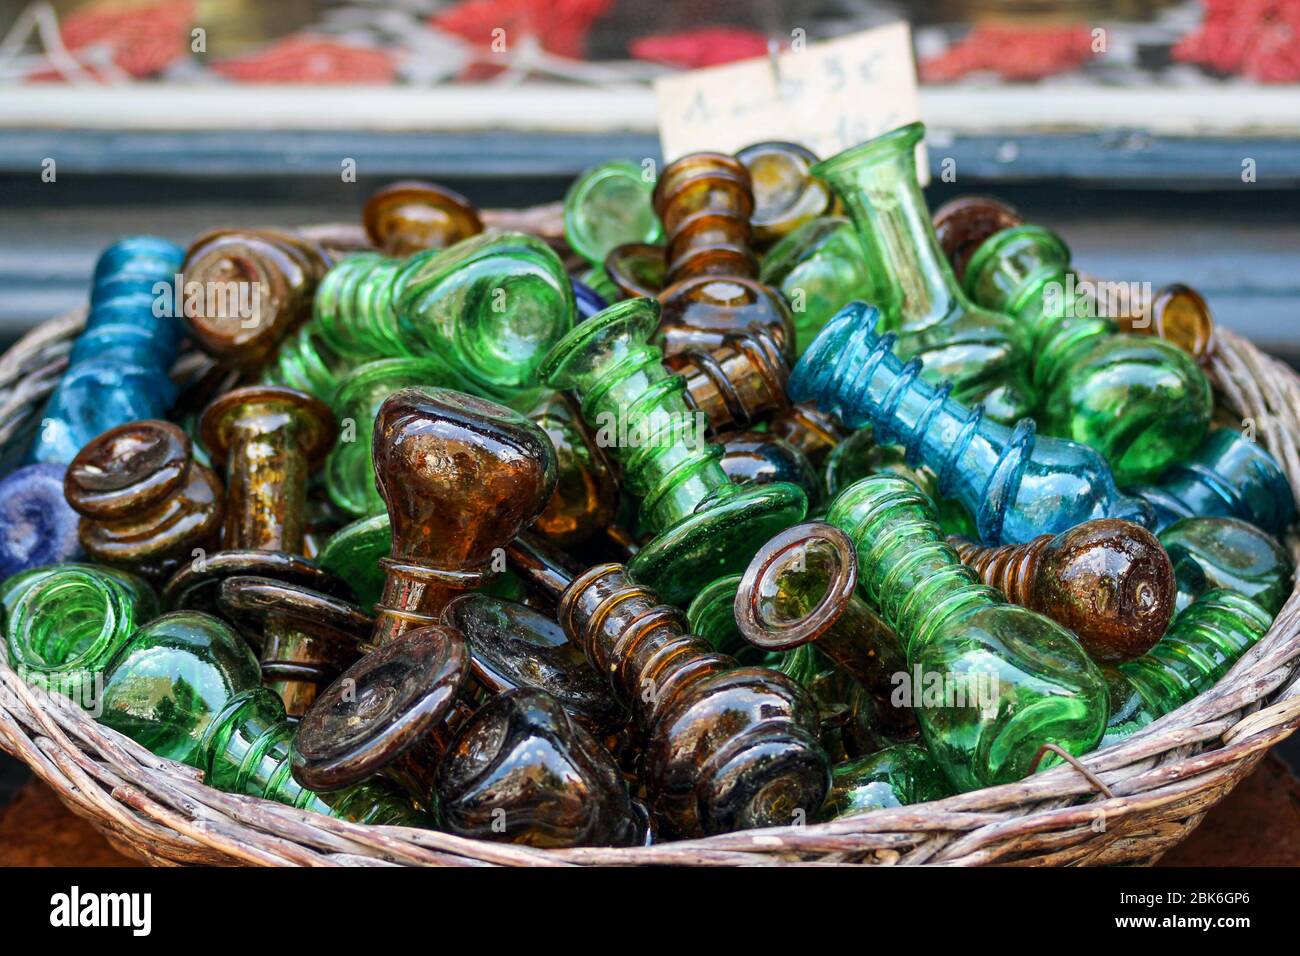 Small green, brown and blue glass bottles or trinkets on sale in a round basket in front of shop Stock Photo